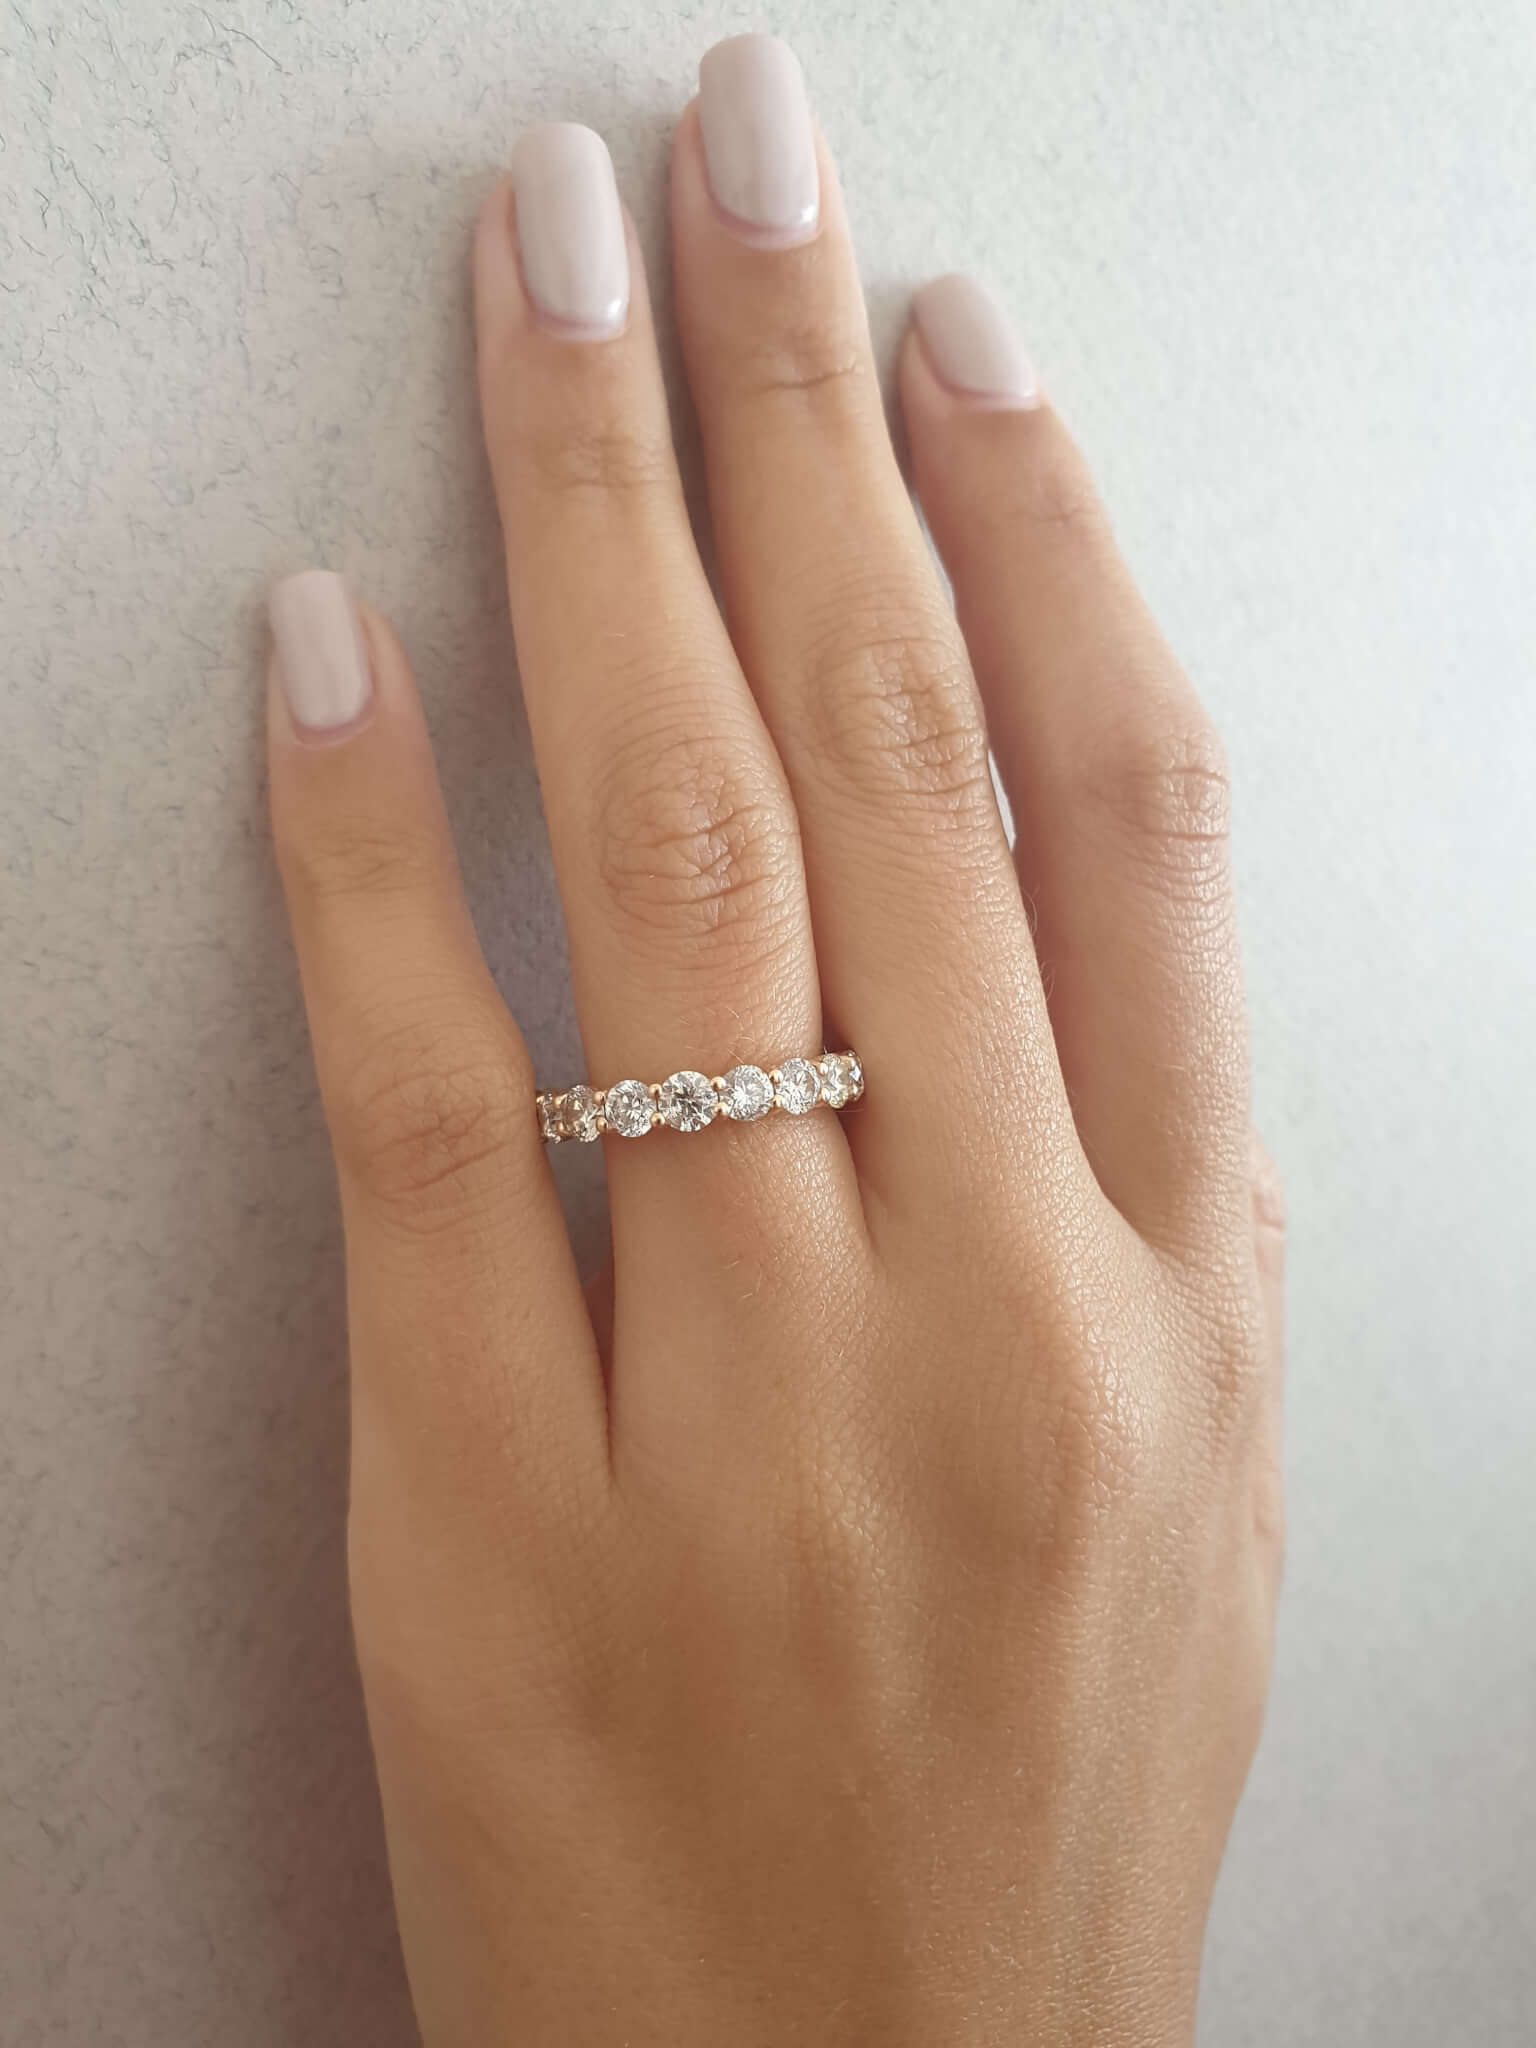 Read more about the article Wedding bands that pair well with your engagement ring